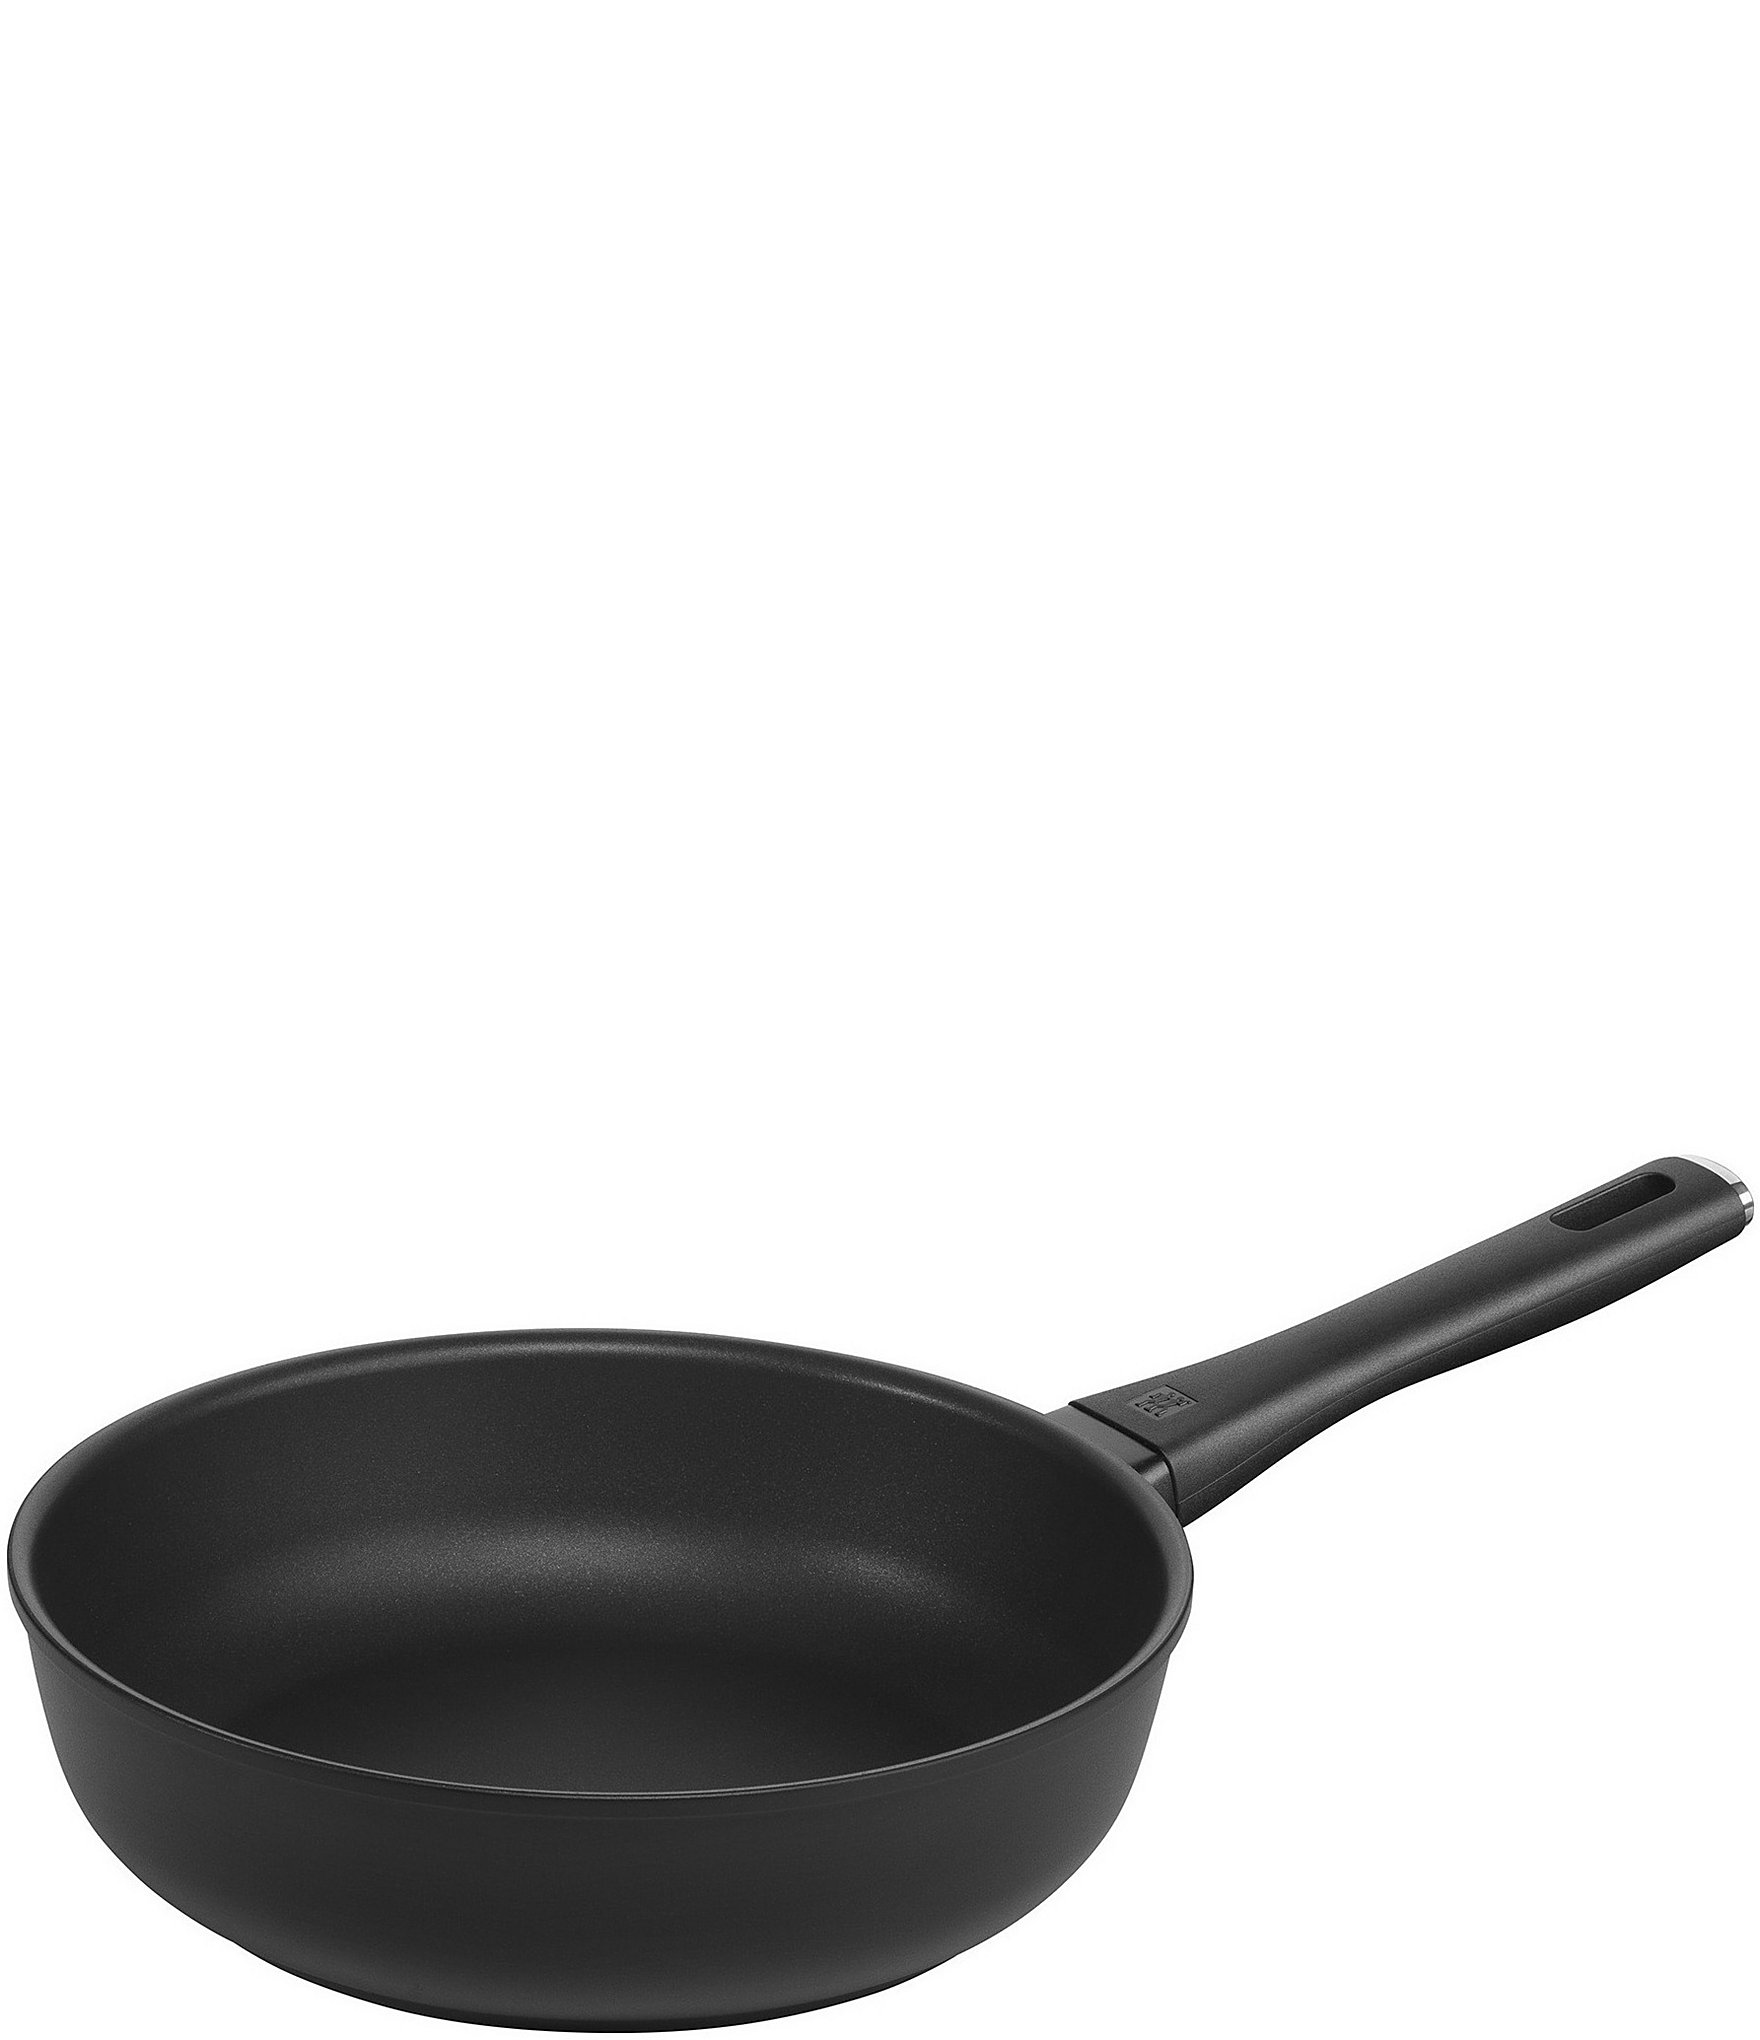 Zwilling Madura Plus Forged Nonstick Deep Fry Pan - Black - 9.5